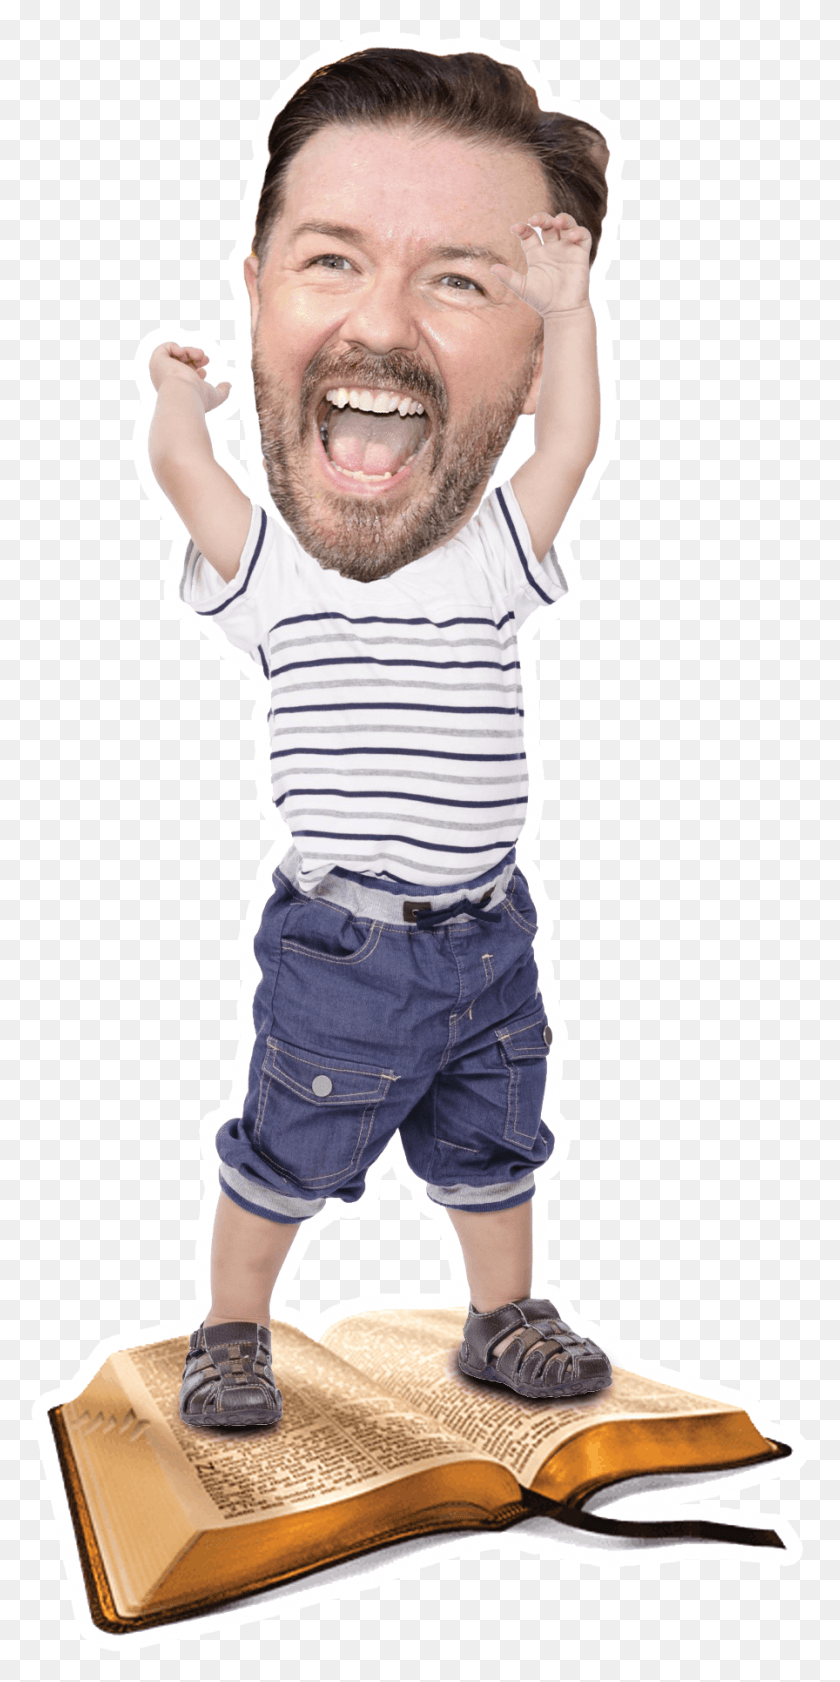 896x1864 Descargar Png / Gervais Full Baby Standing, Ropa, Pantalones, Hd Png